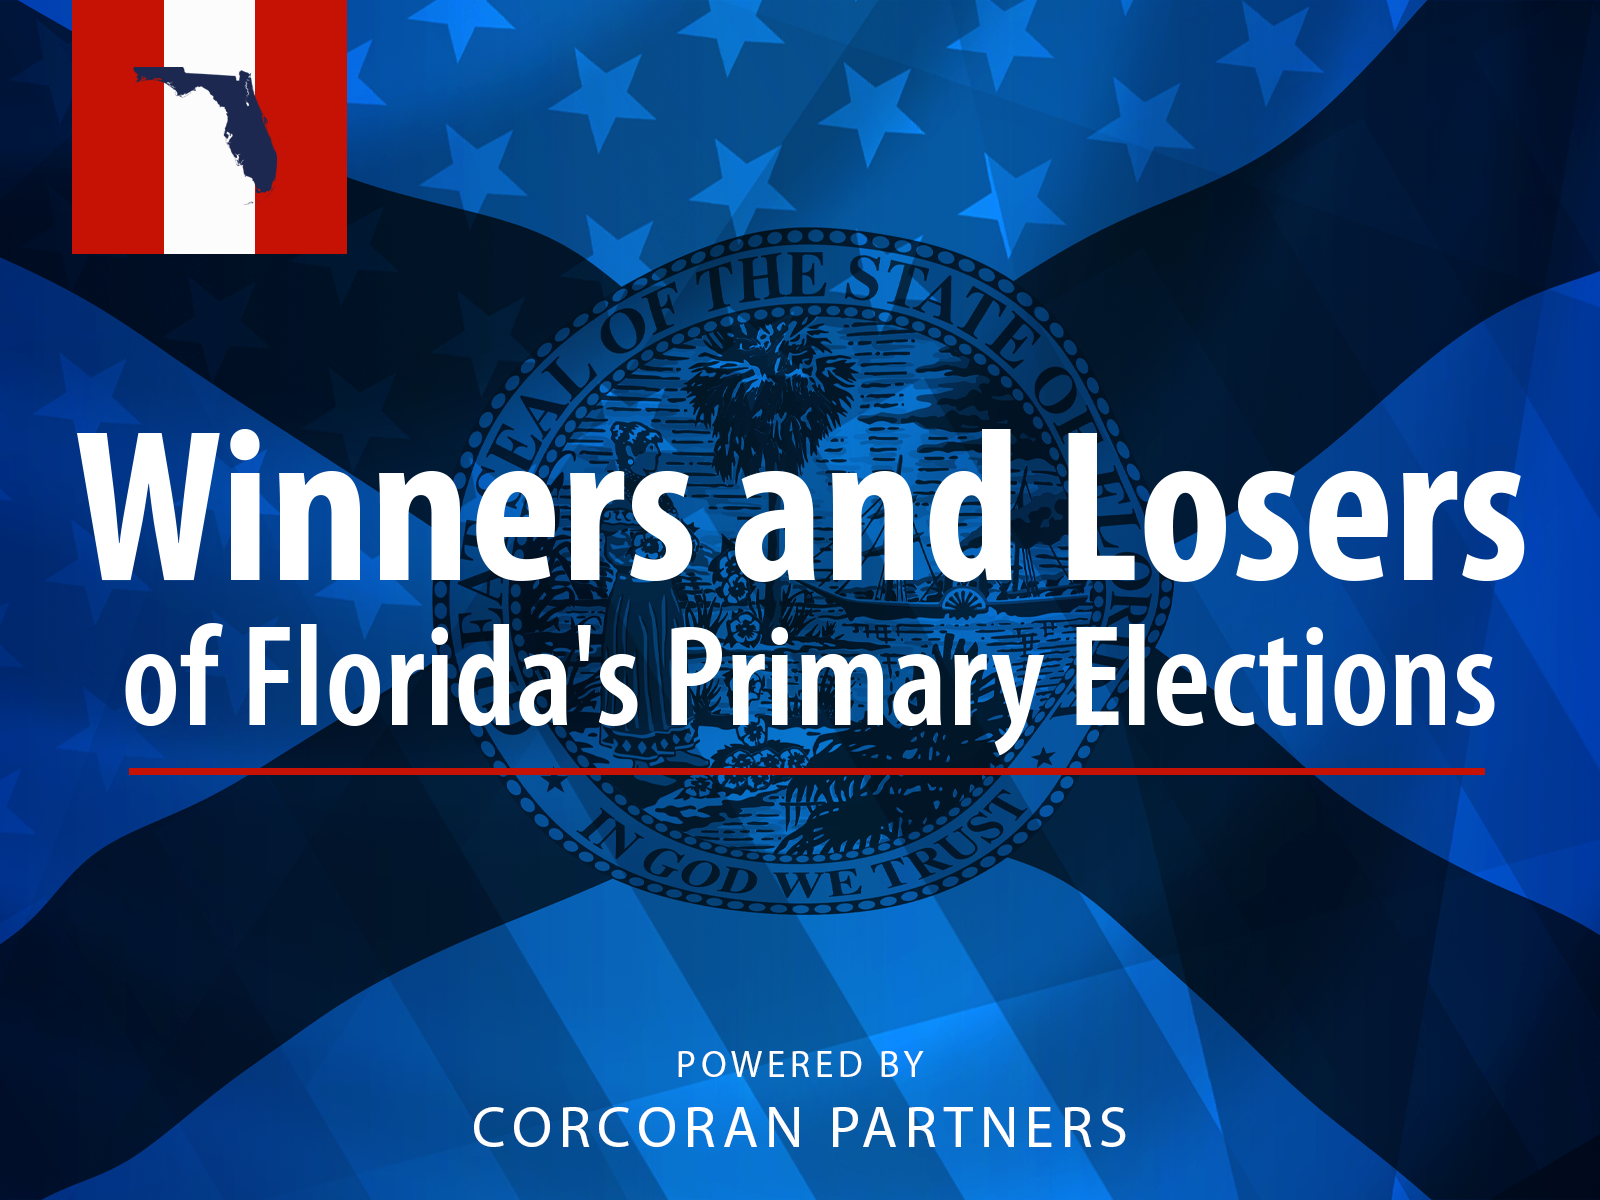 Winners and losers emerging from Florida's Primary Elections